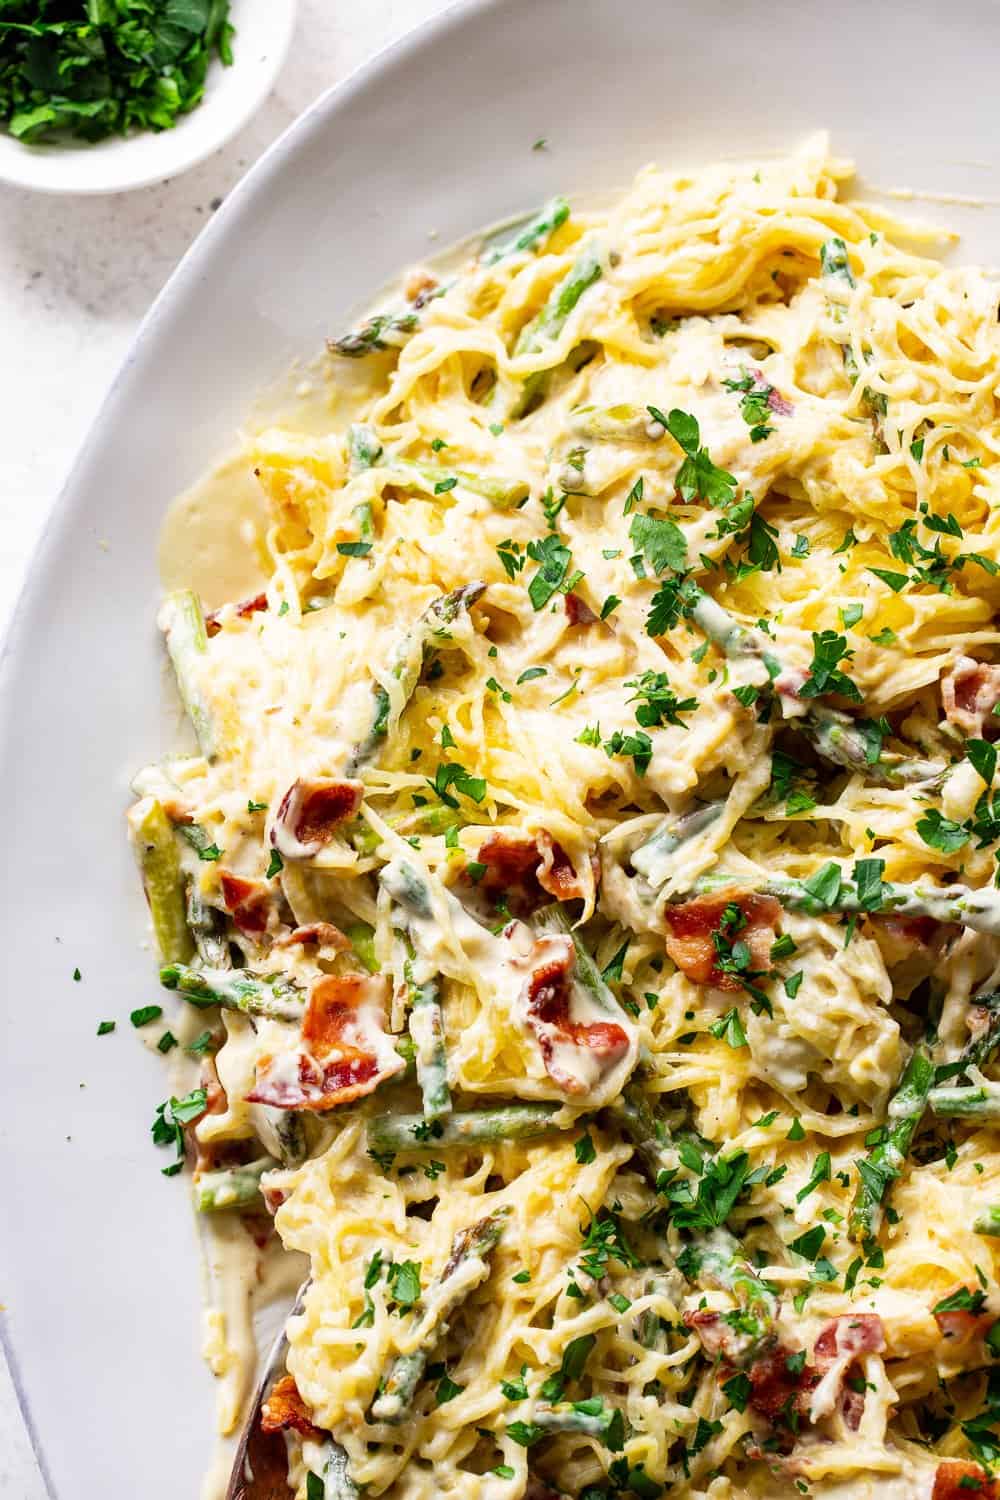 This roasted garlic spaghetti squash has a creamy savory sauce with crispy bacon plus sautéed asparagus. It’s flavor packed, low in carbs, paleo and Whole30 friendly. #paleo #whole30 #keto #lowcarb #cleaneating